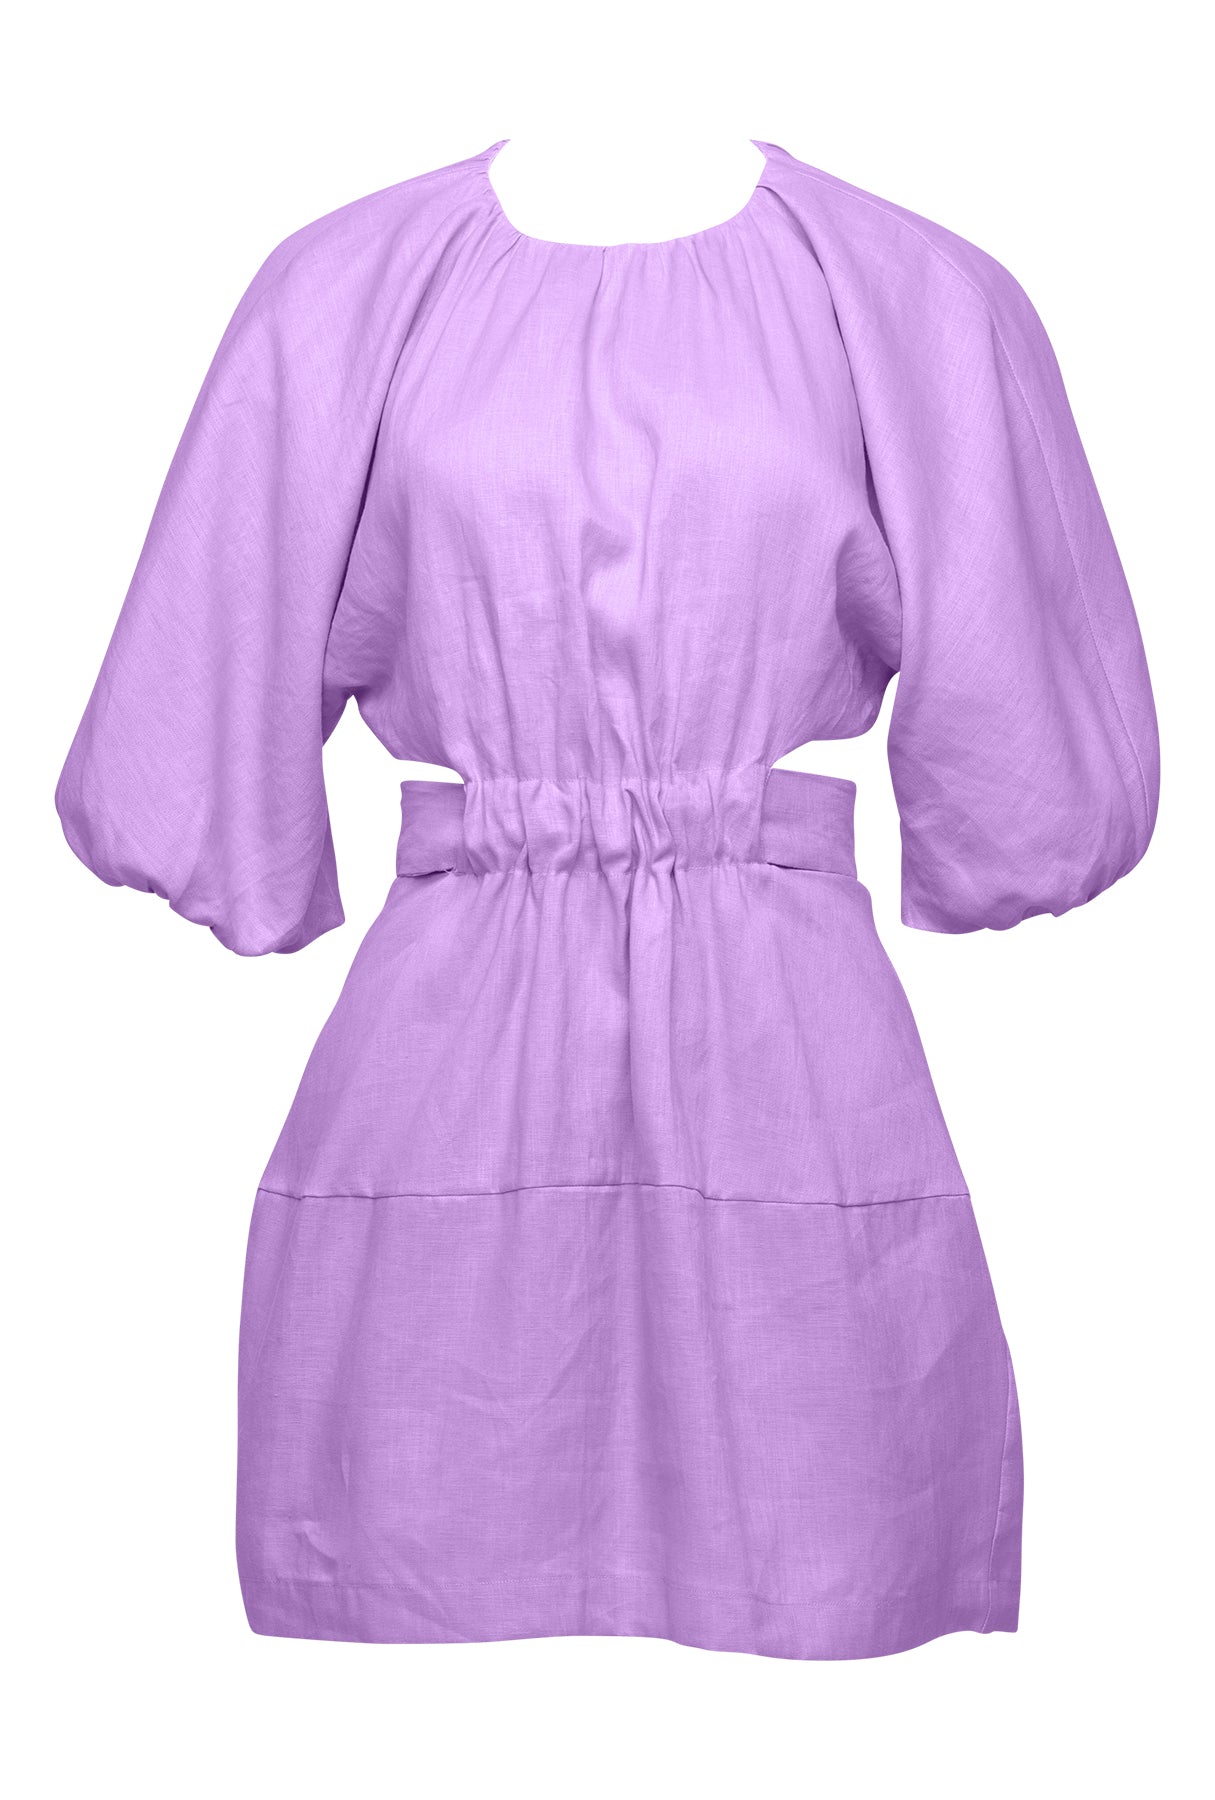 Buttons and Bows Mini Dress - Wisteria